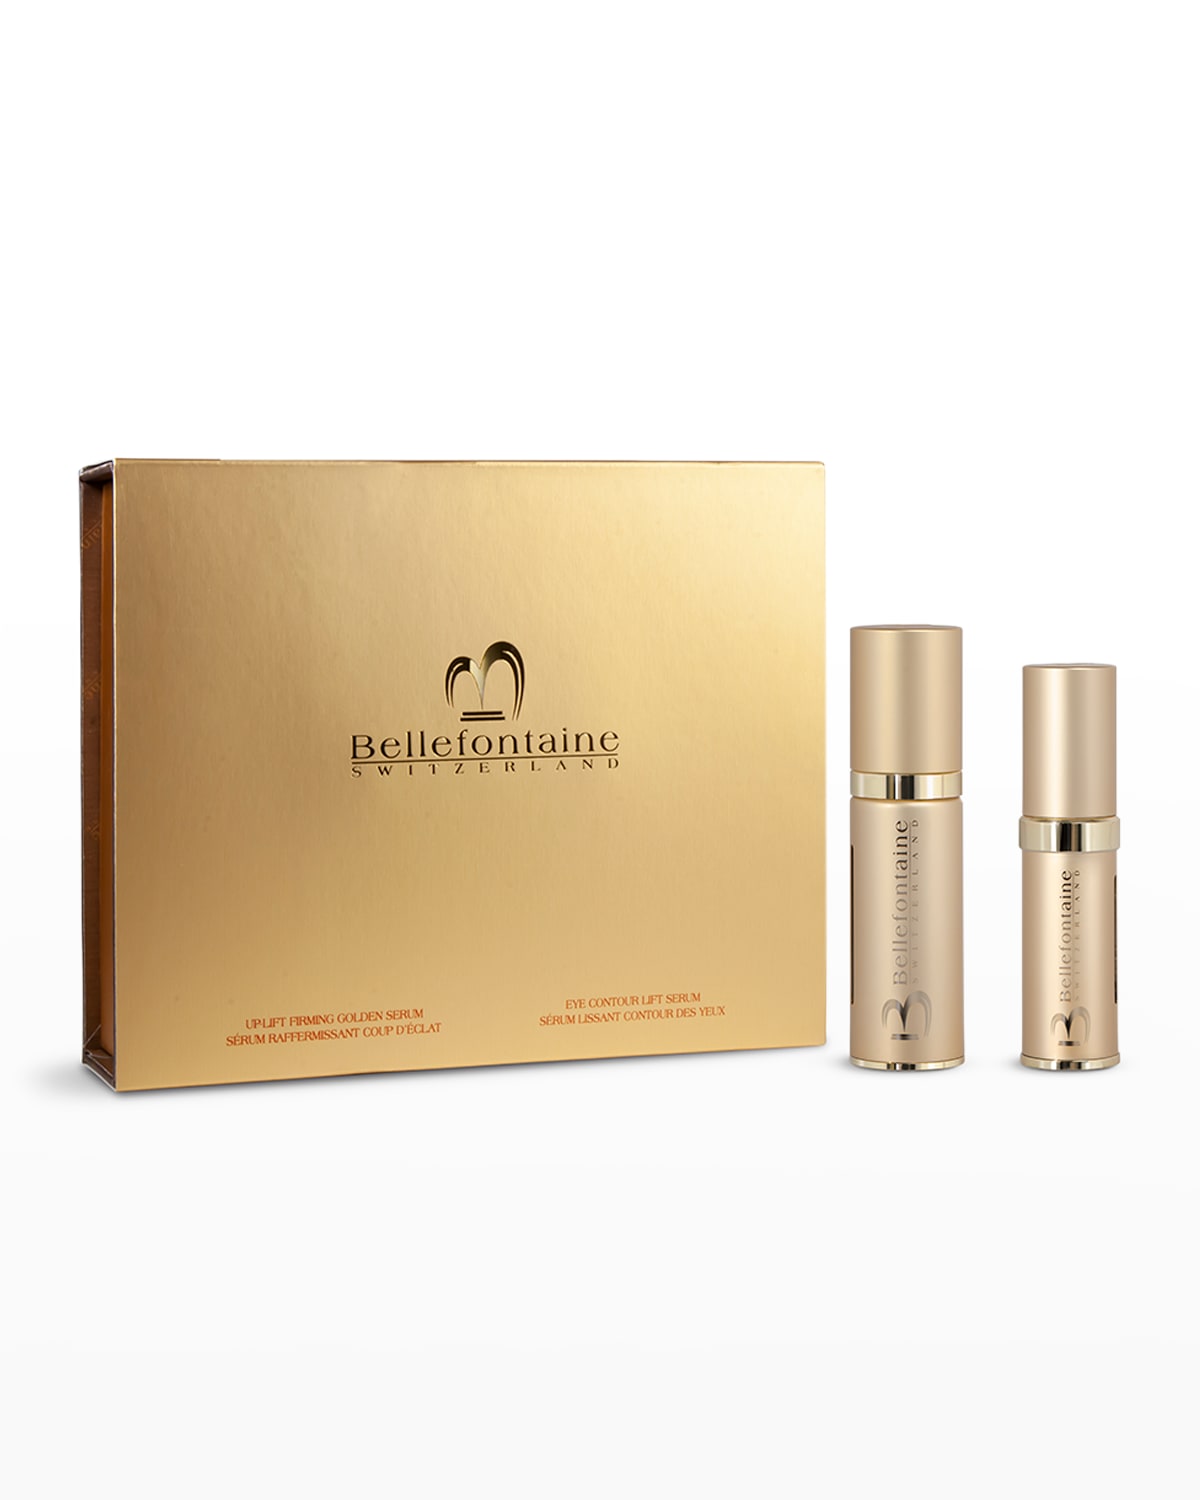 Bellefontaine Firming And Lifting Duo Set